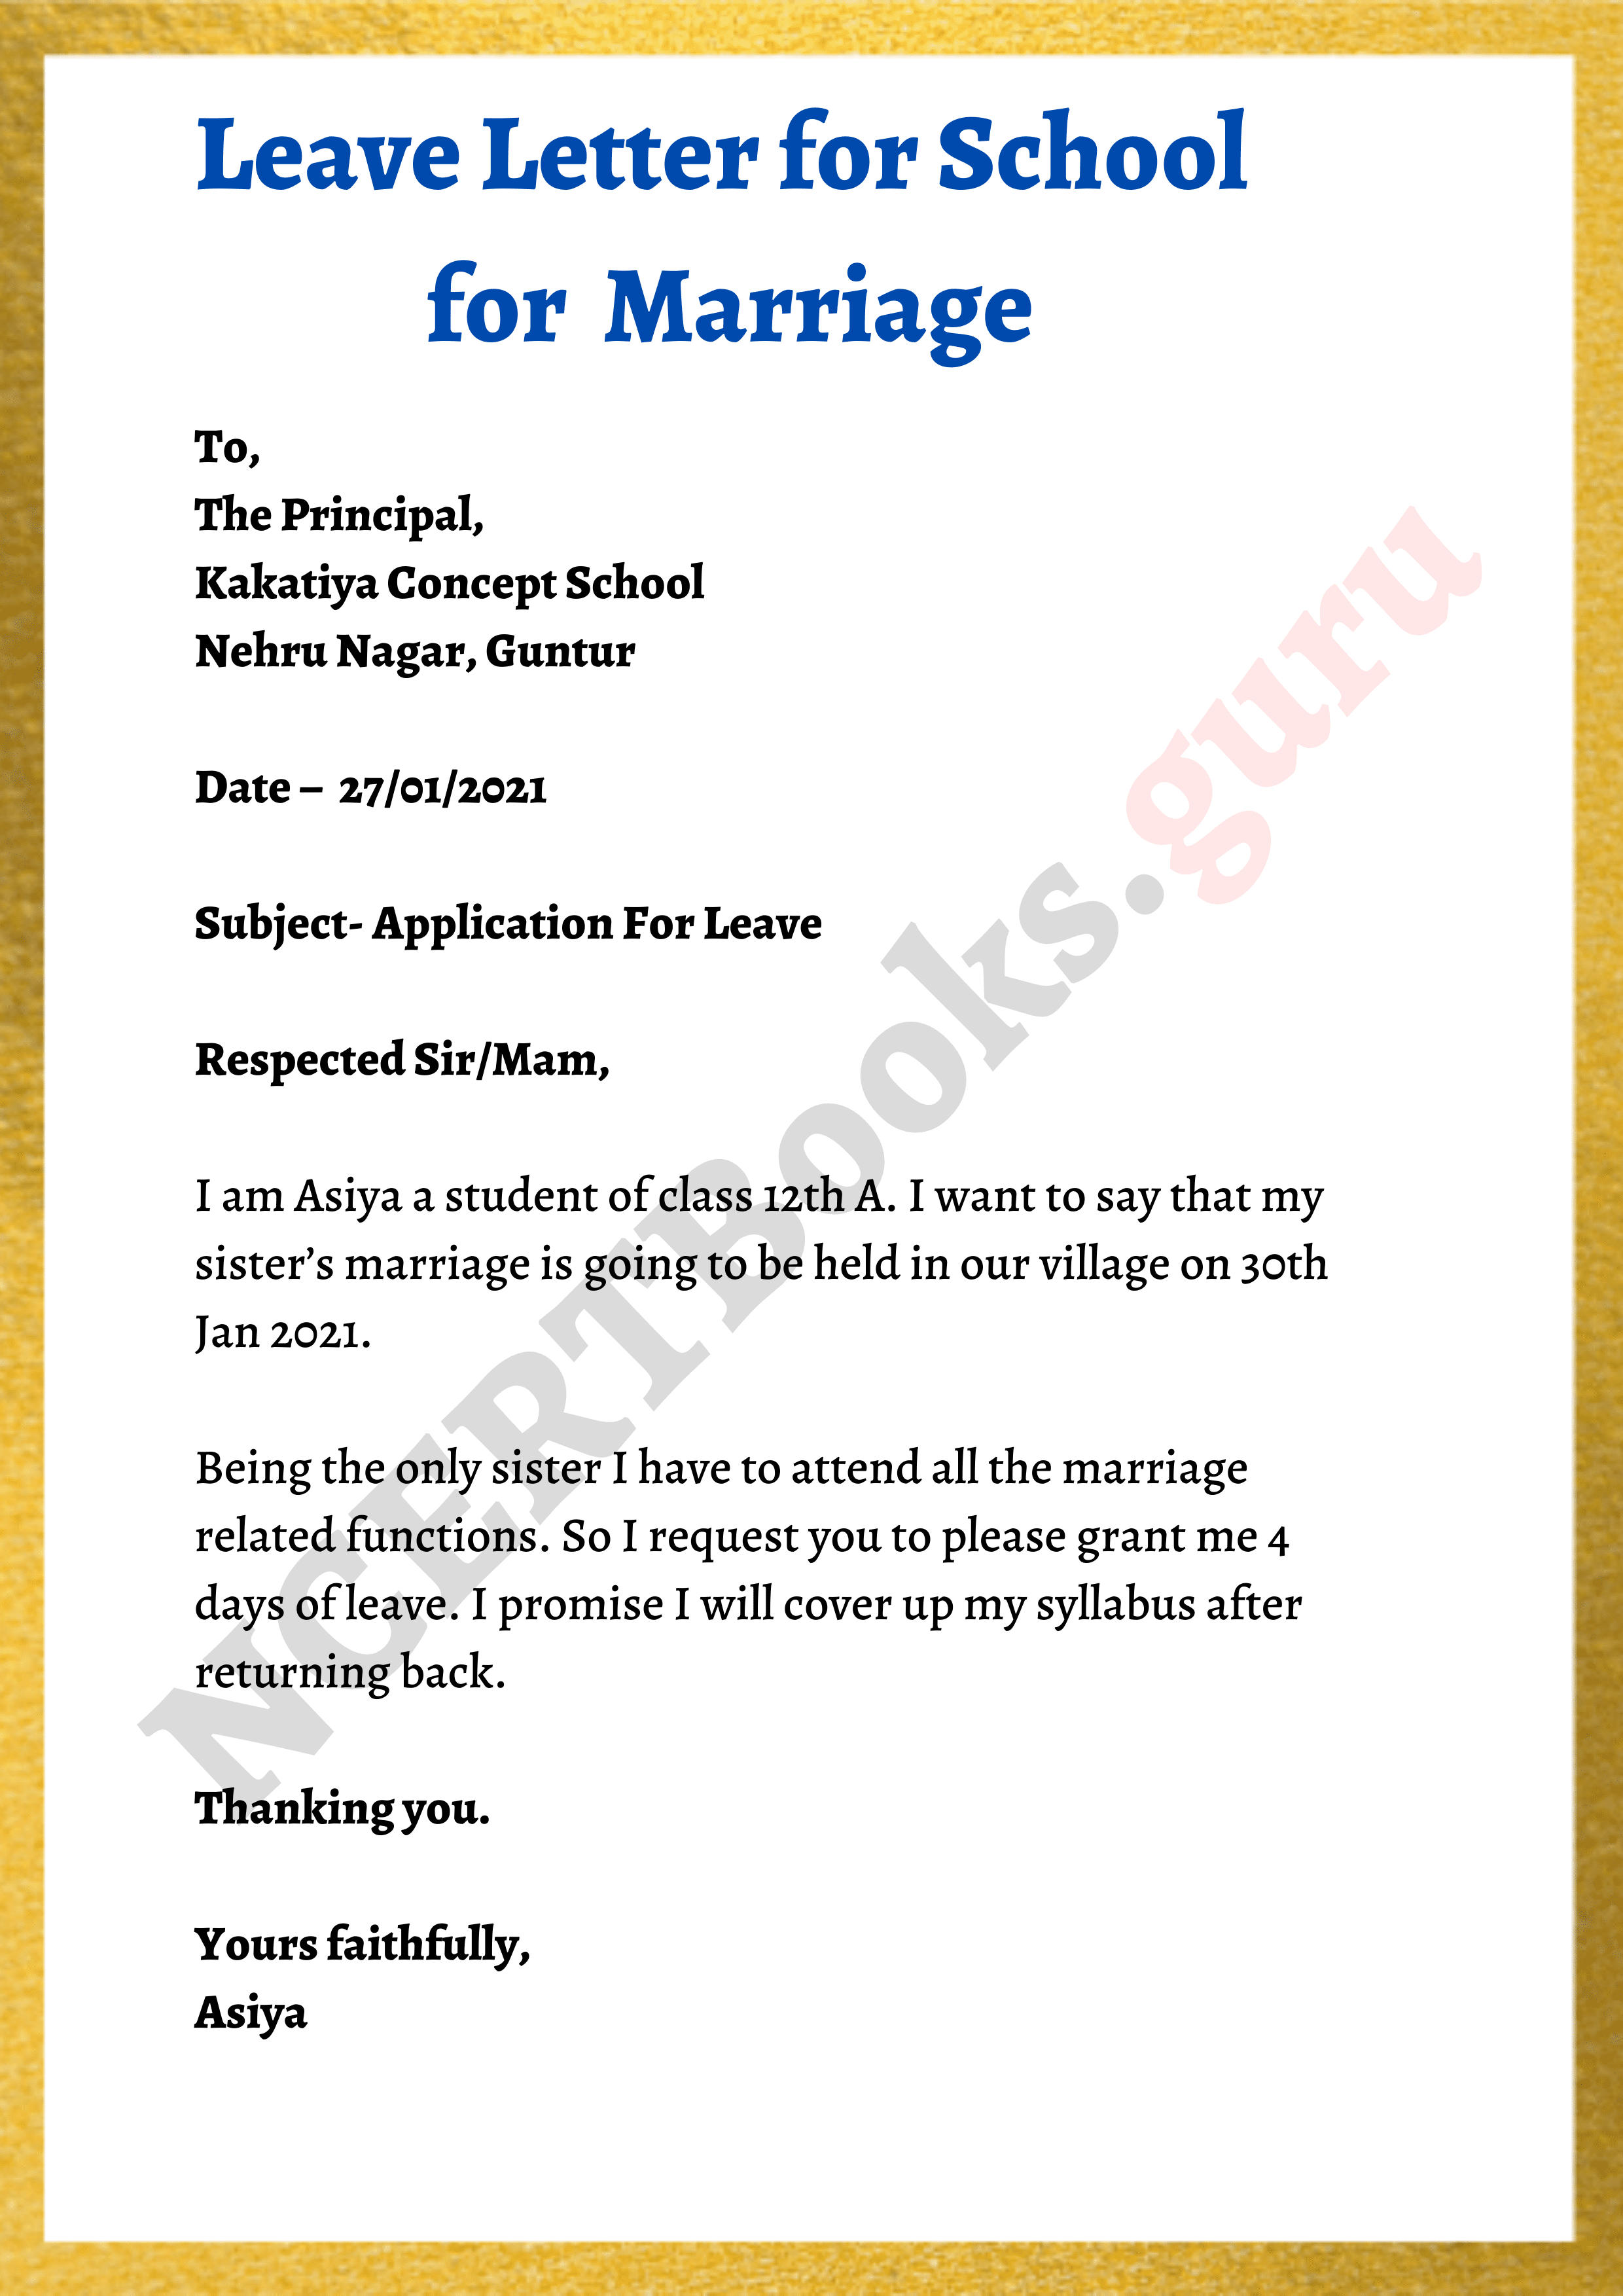 Leave Letter for School for Marriage